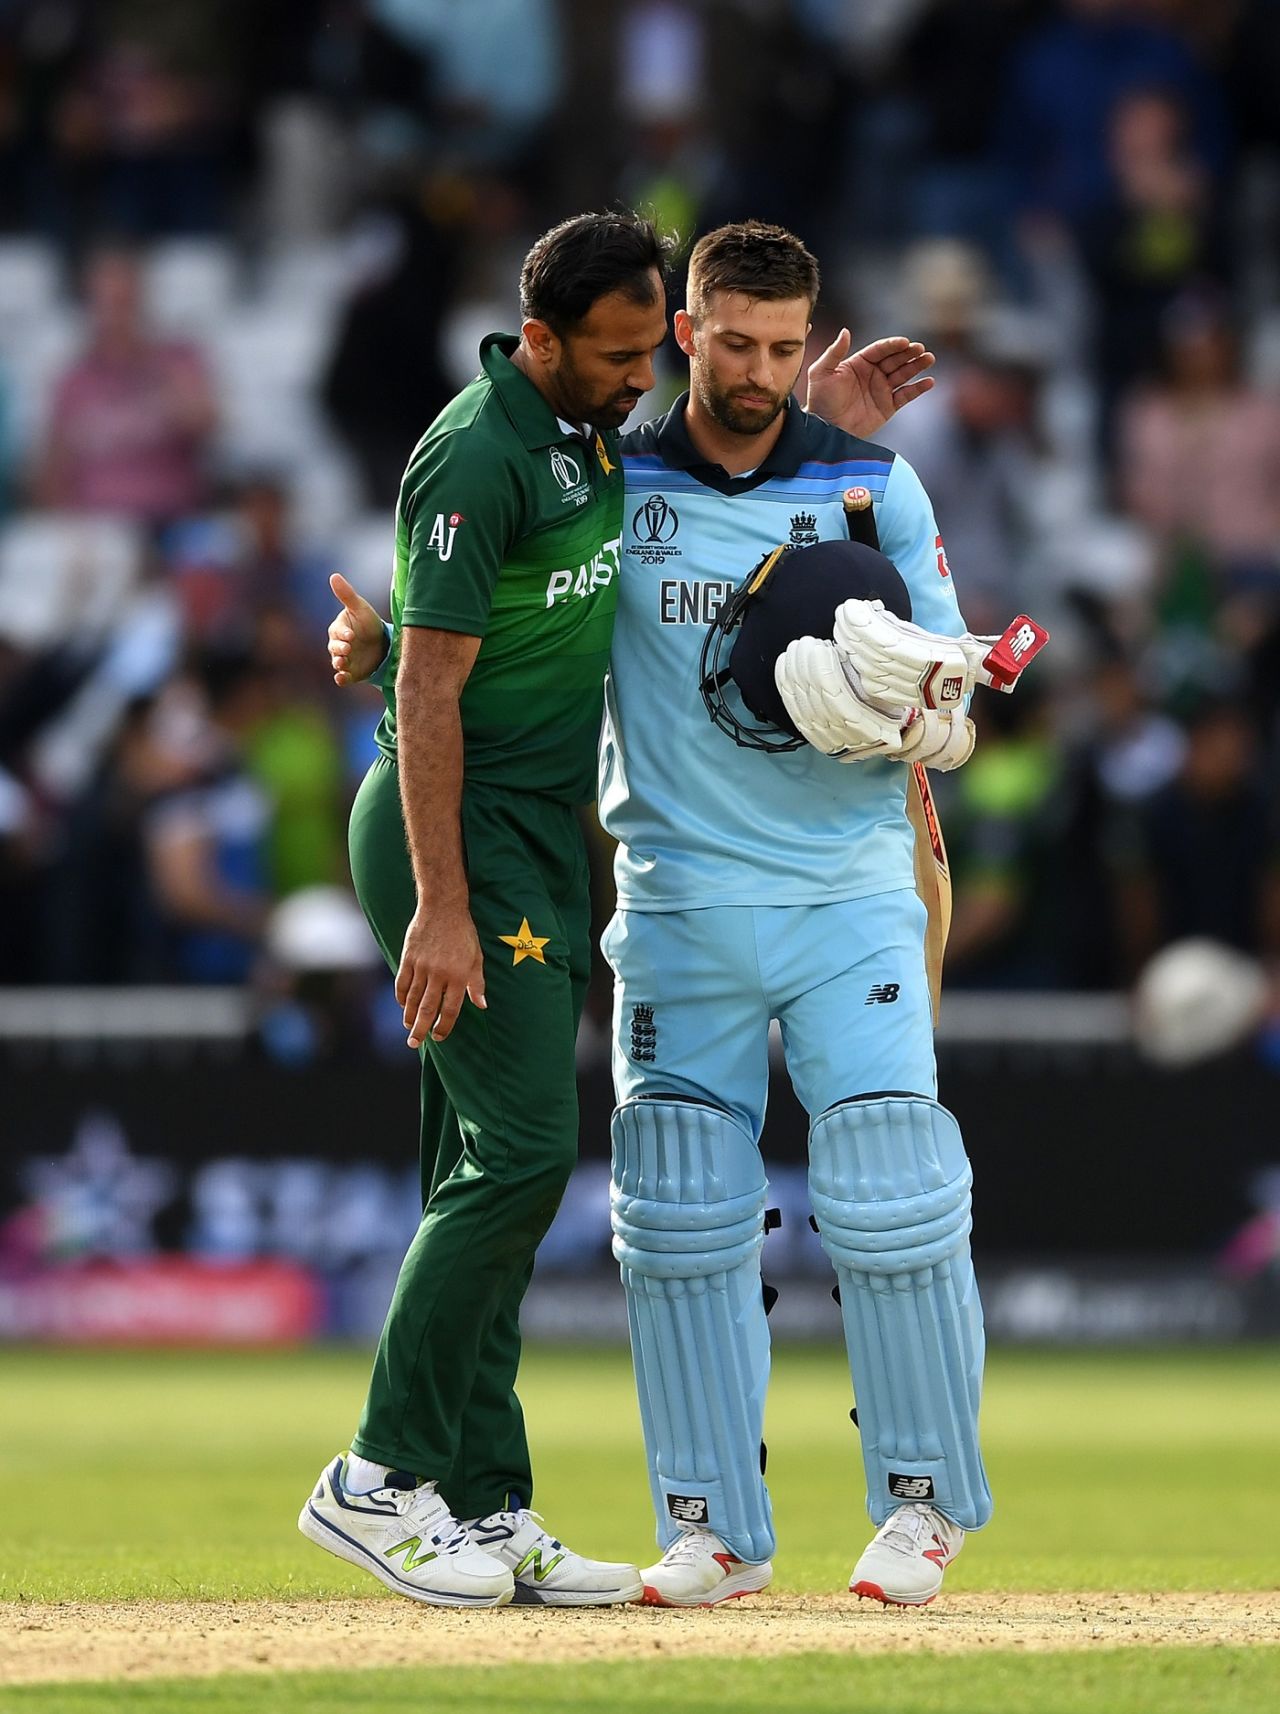 Wahab Riaz and Mark Wood pat each other after the game, England v Pakistan, World Cup 2019, Trent Bridge, June 3, 2019